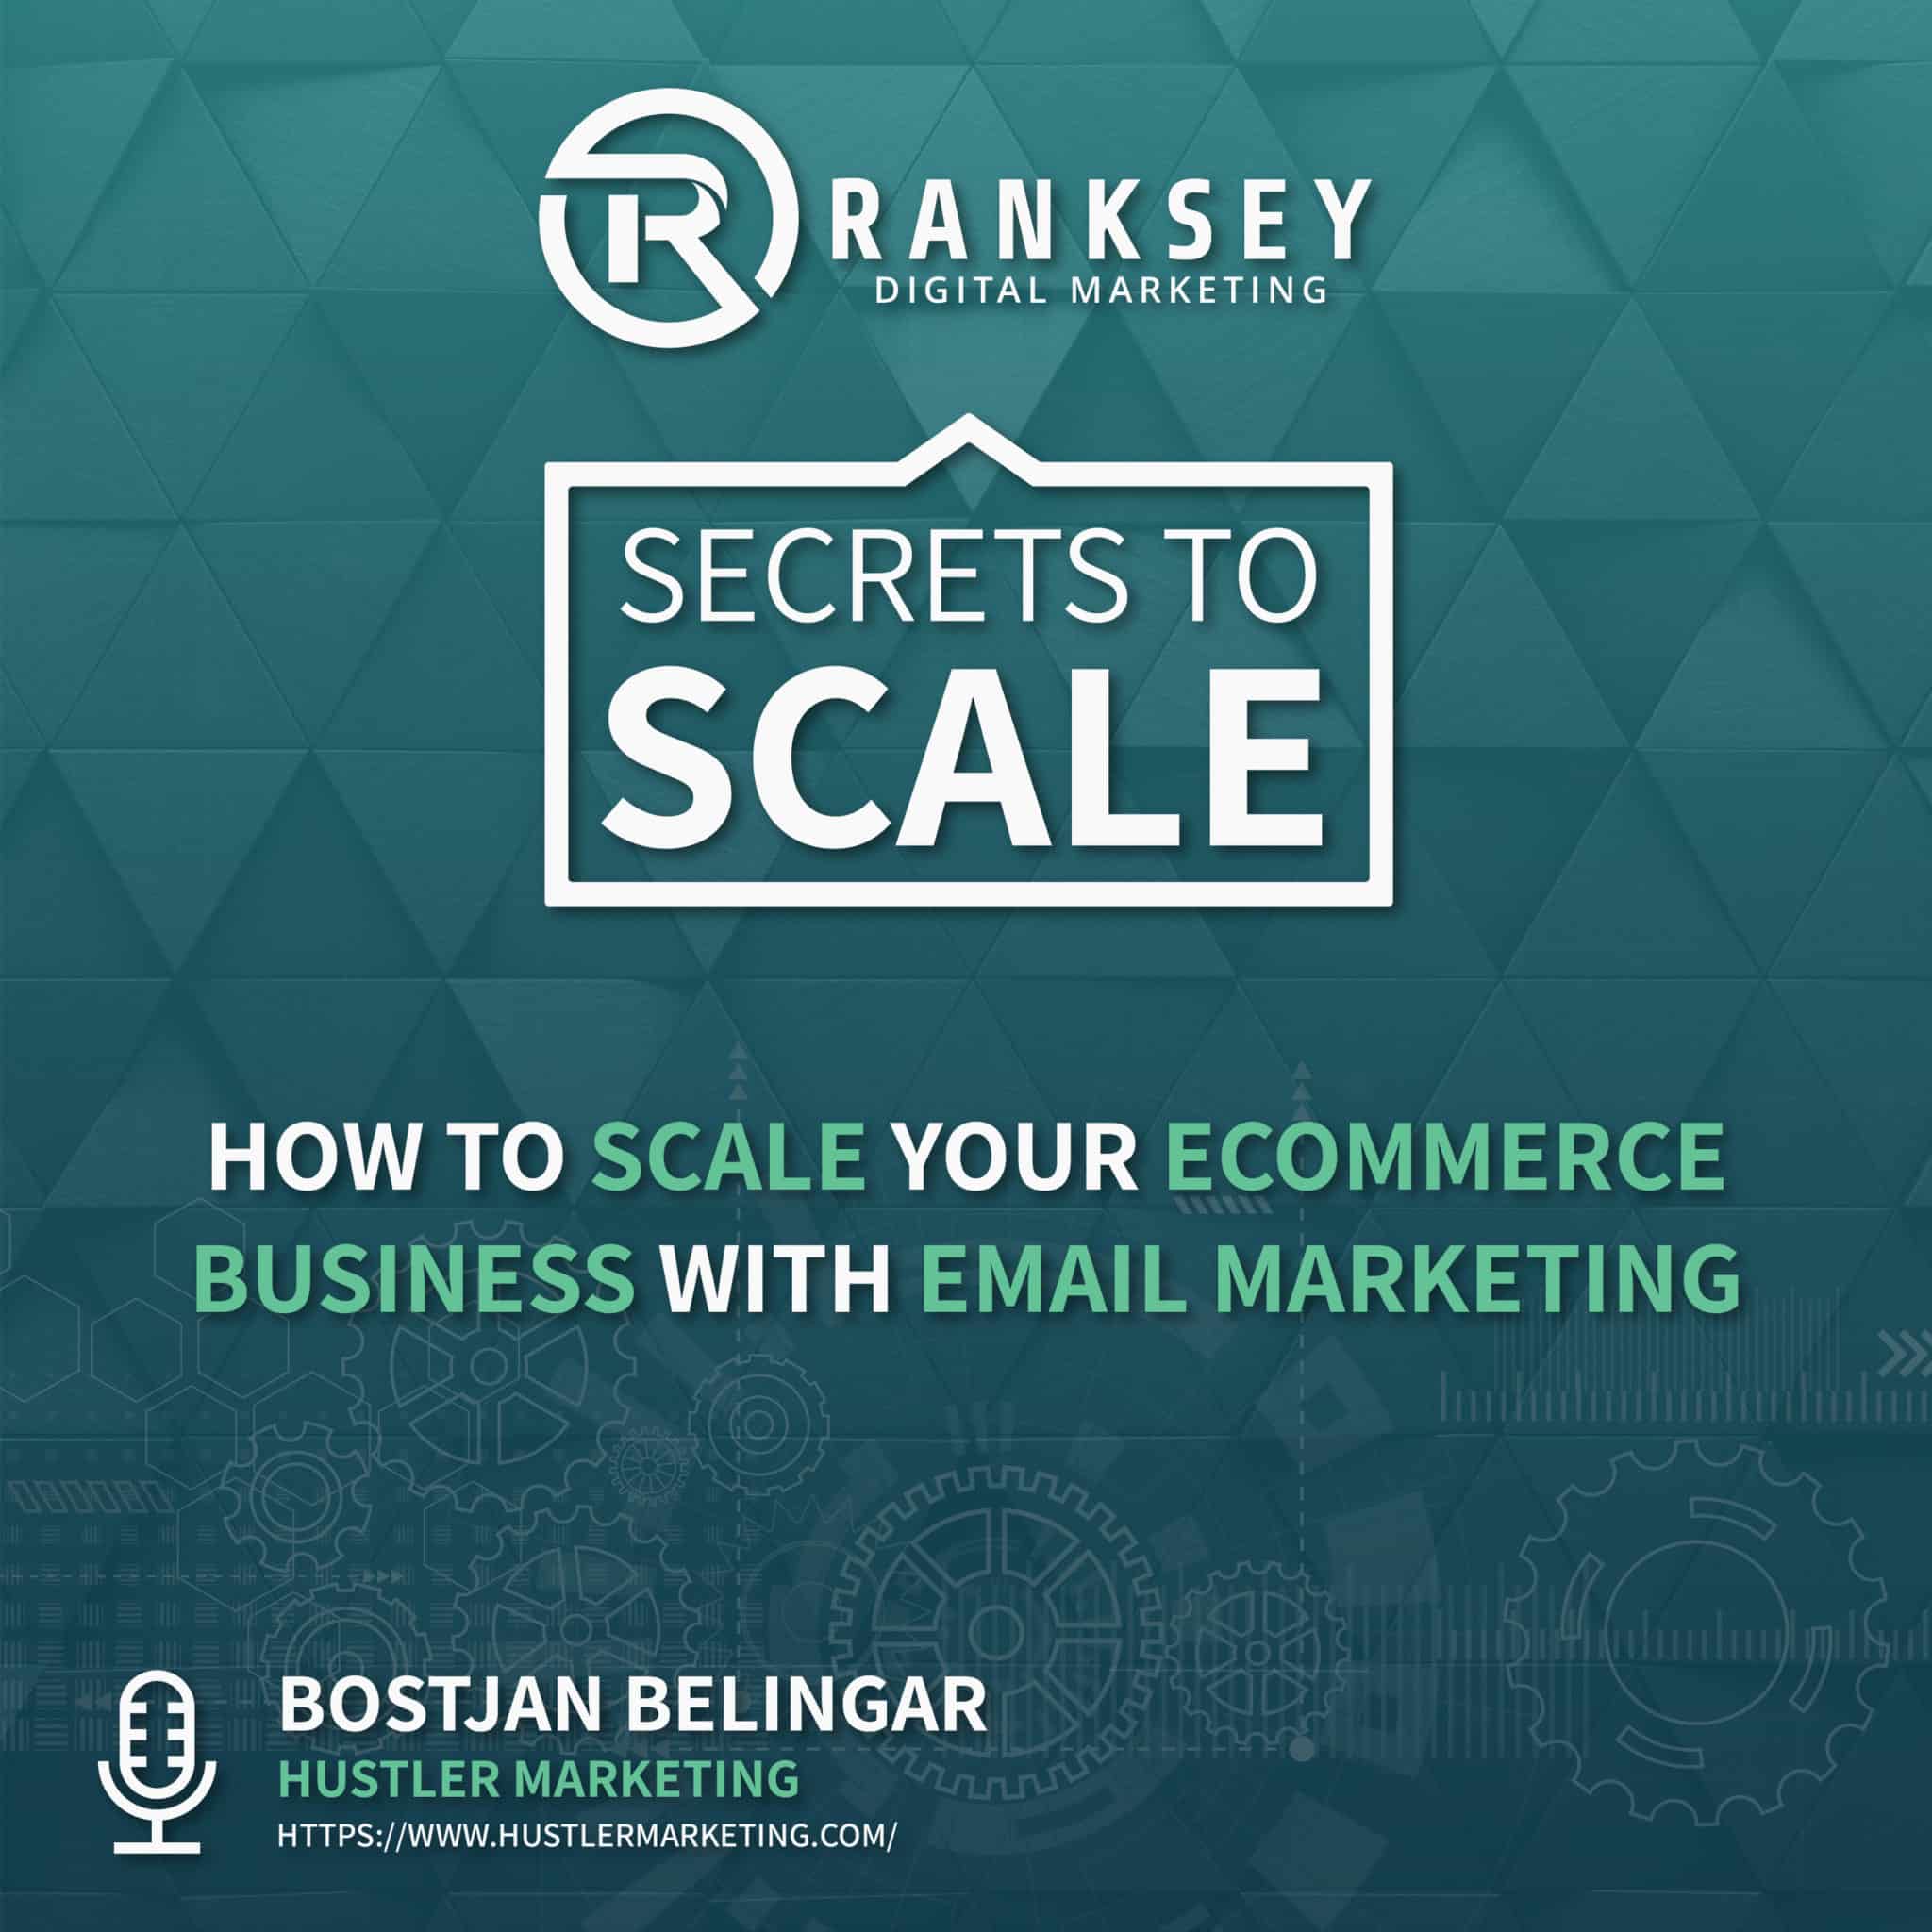 046 - How Email Marketing Helps Businesses Scale With Bostjan Belingar